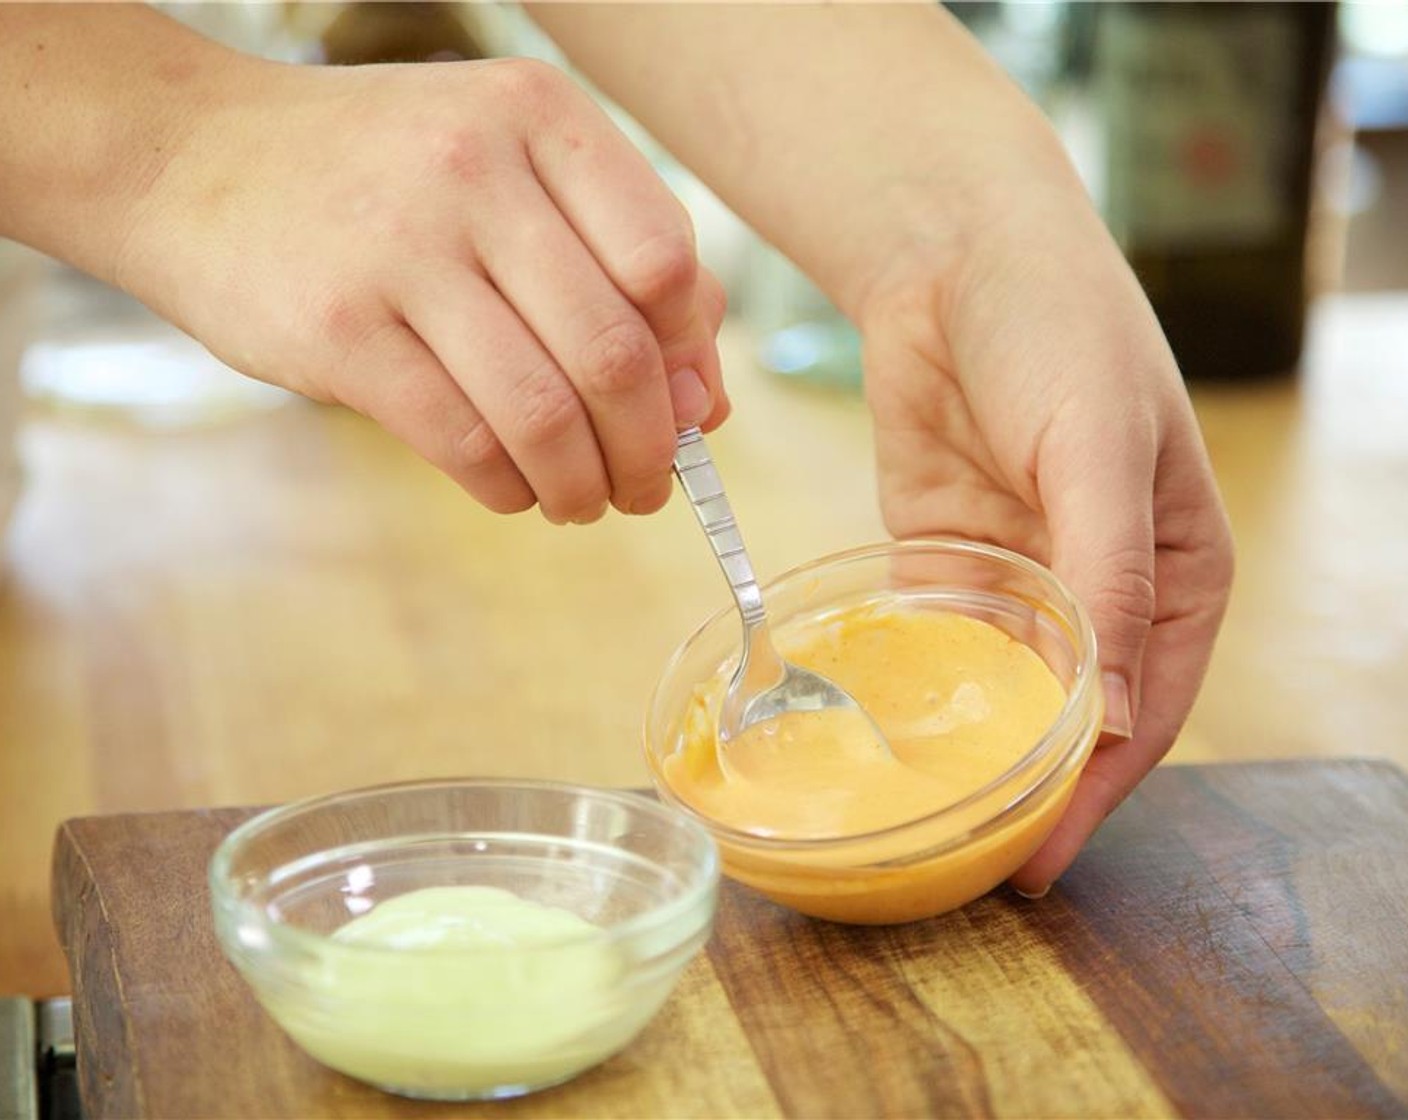 step 4 Rinse and a dry small bowl used for spices. Mix Mayonnaise (1 Tbsp) with the Sriracha (1 Tbsp) until well combined and place in refrigerator.